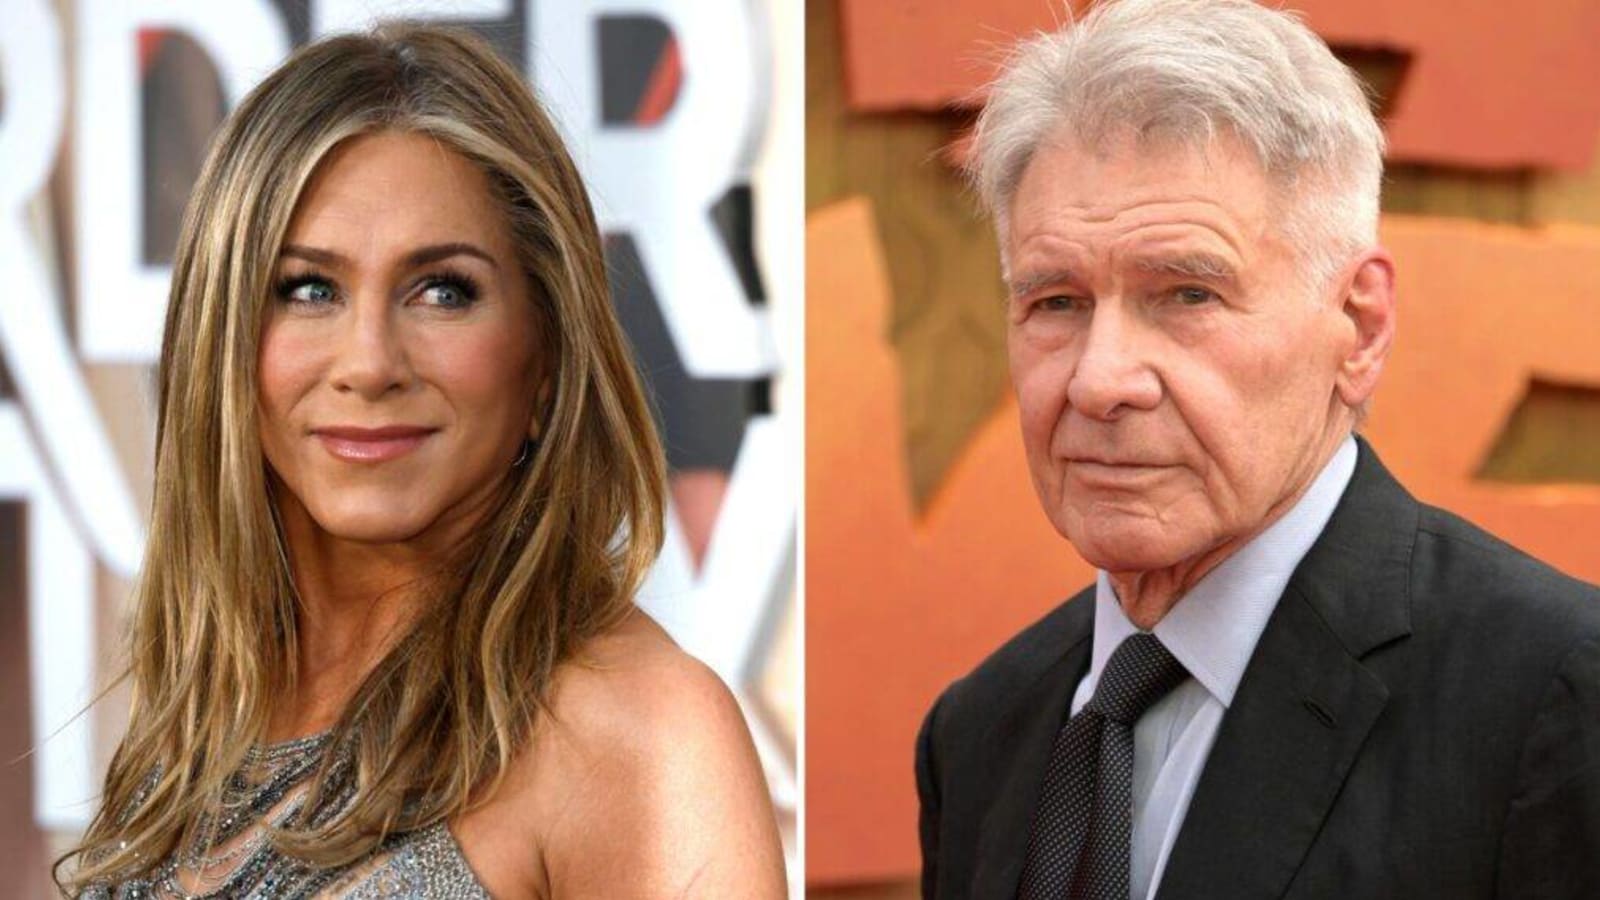 Jennifer Aniston & Harrison Ford Were Considered for ‘NCIS’ Roles, Exec Producer Says